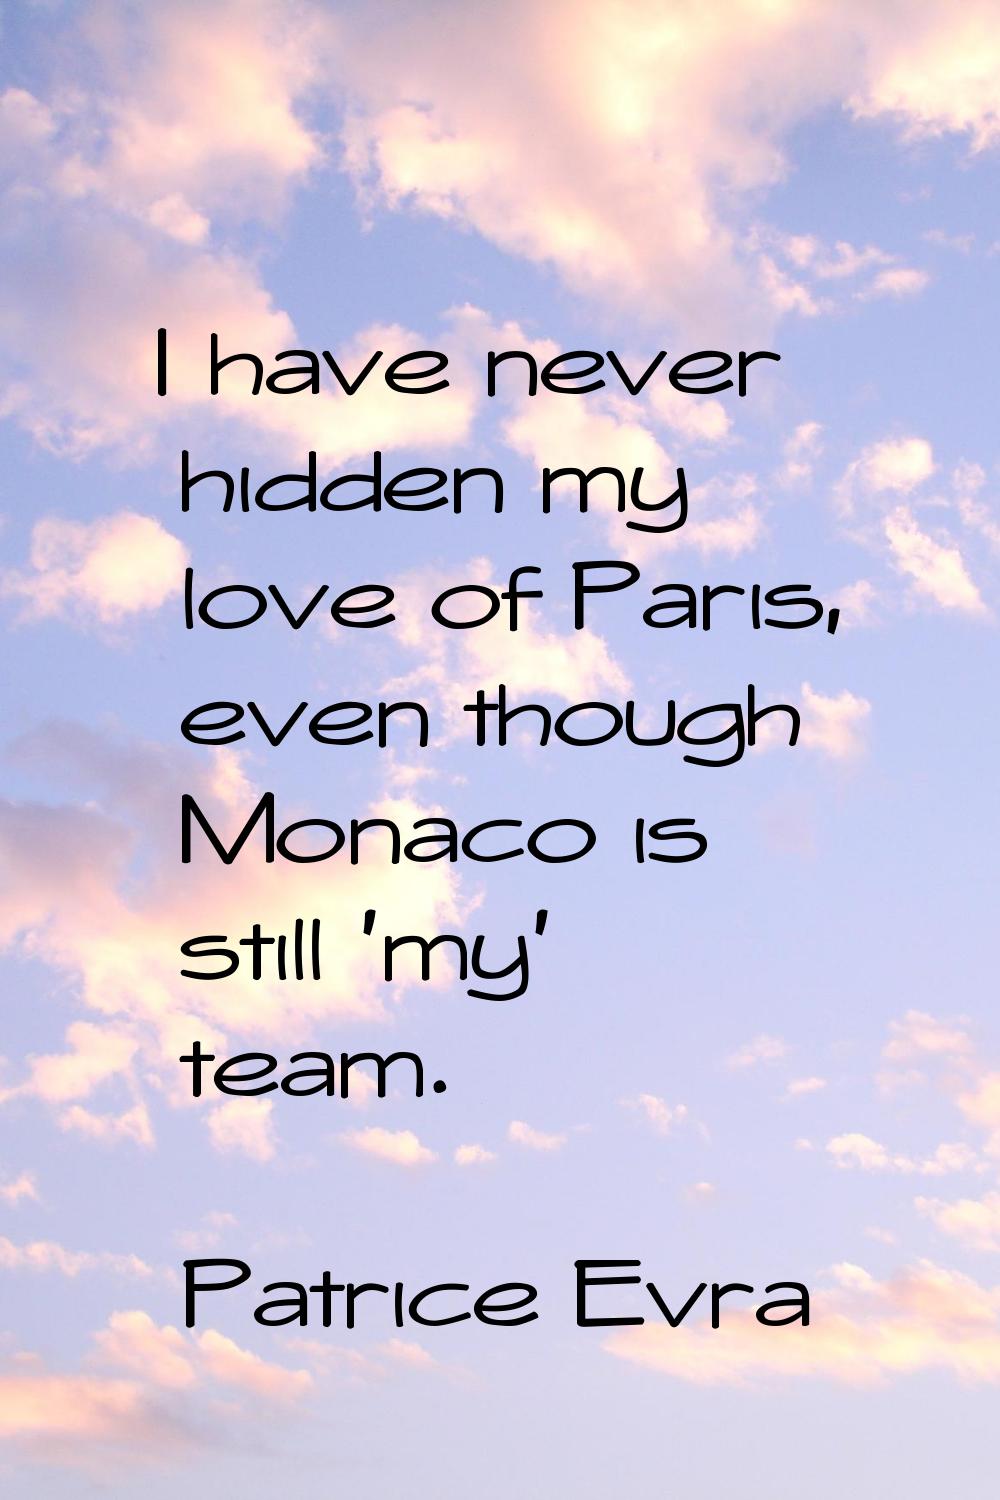 I have never hidden my love of Paris, even though Monaco is still 'my' team.